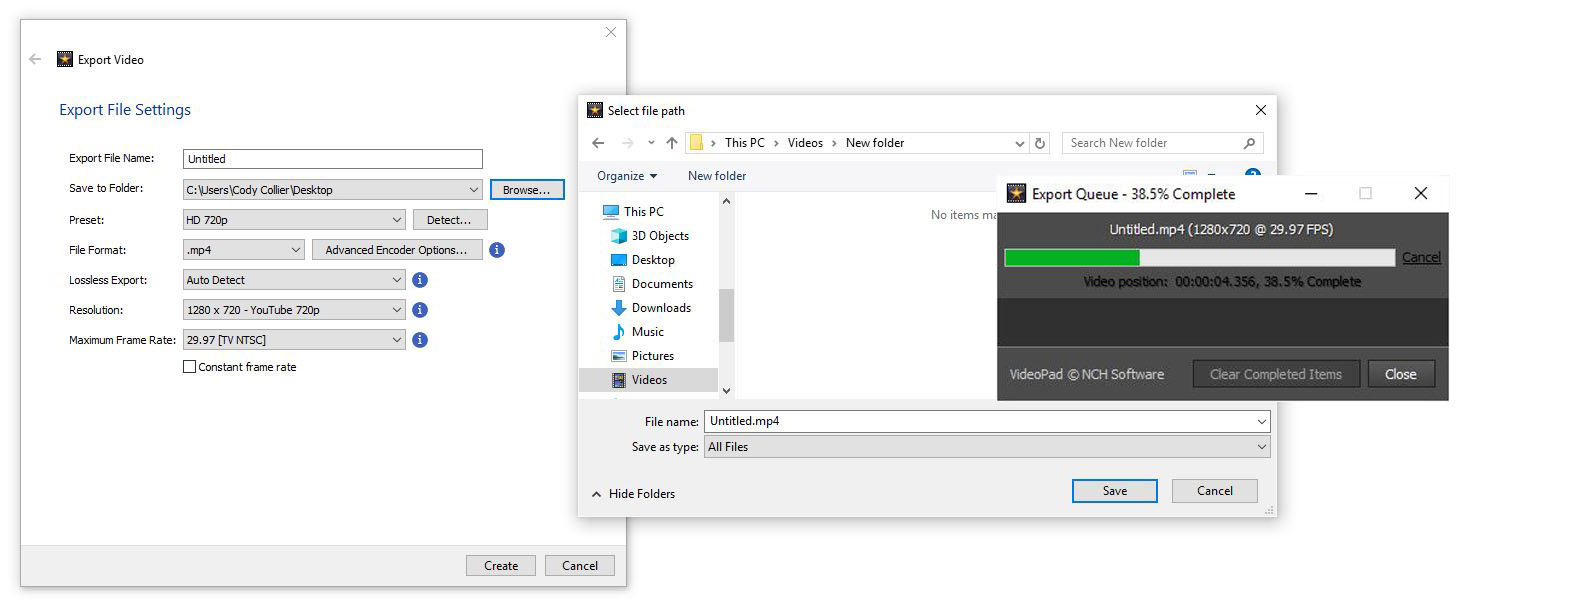 how to export video to transfer to PC